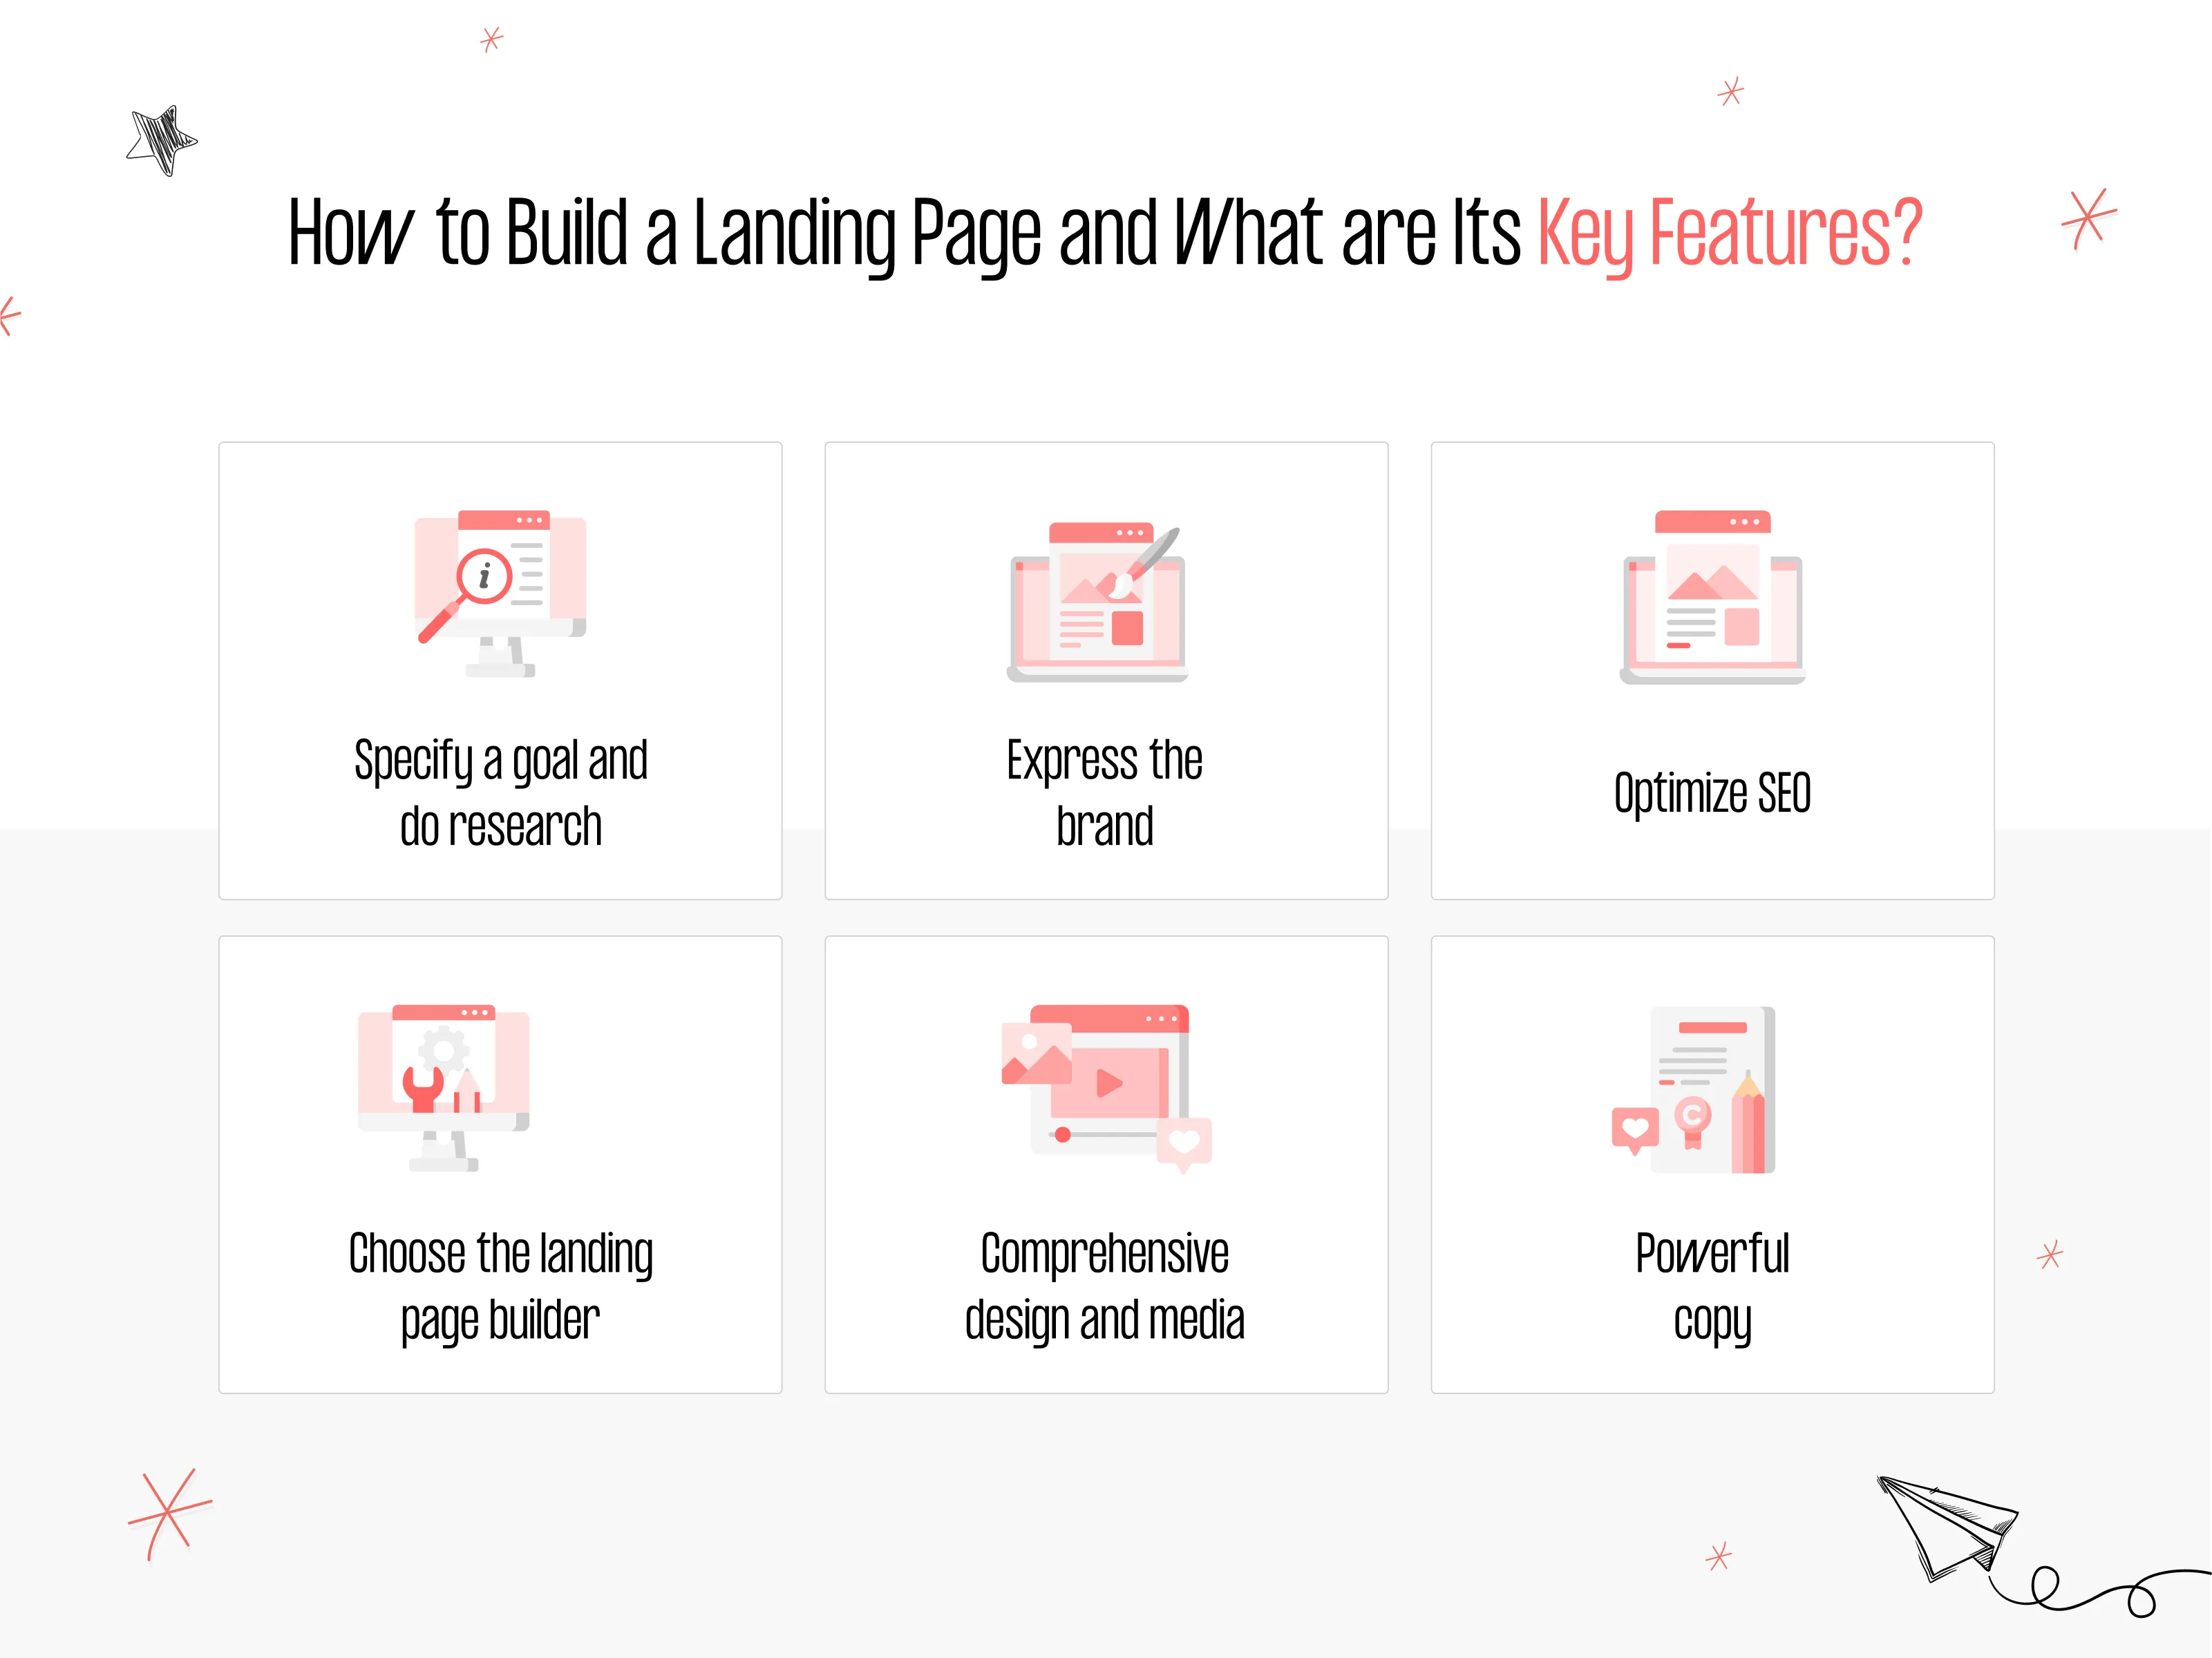 key features of building a landing page